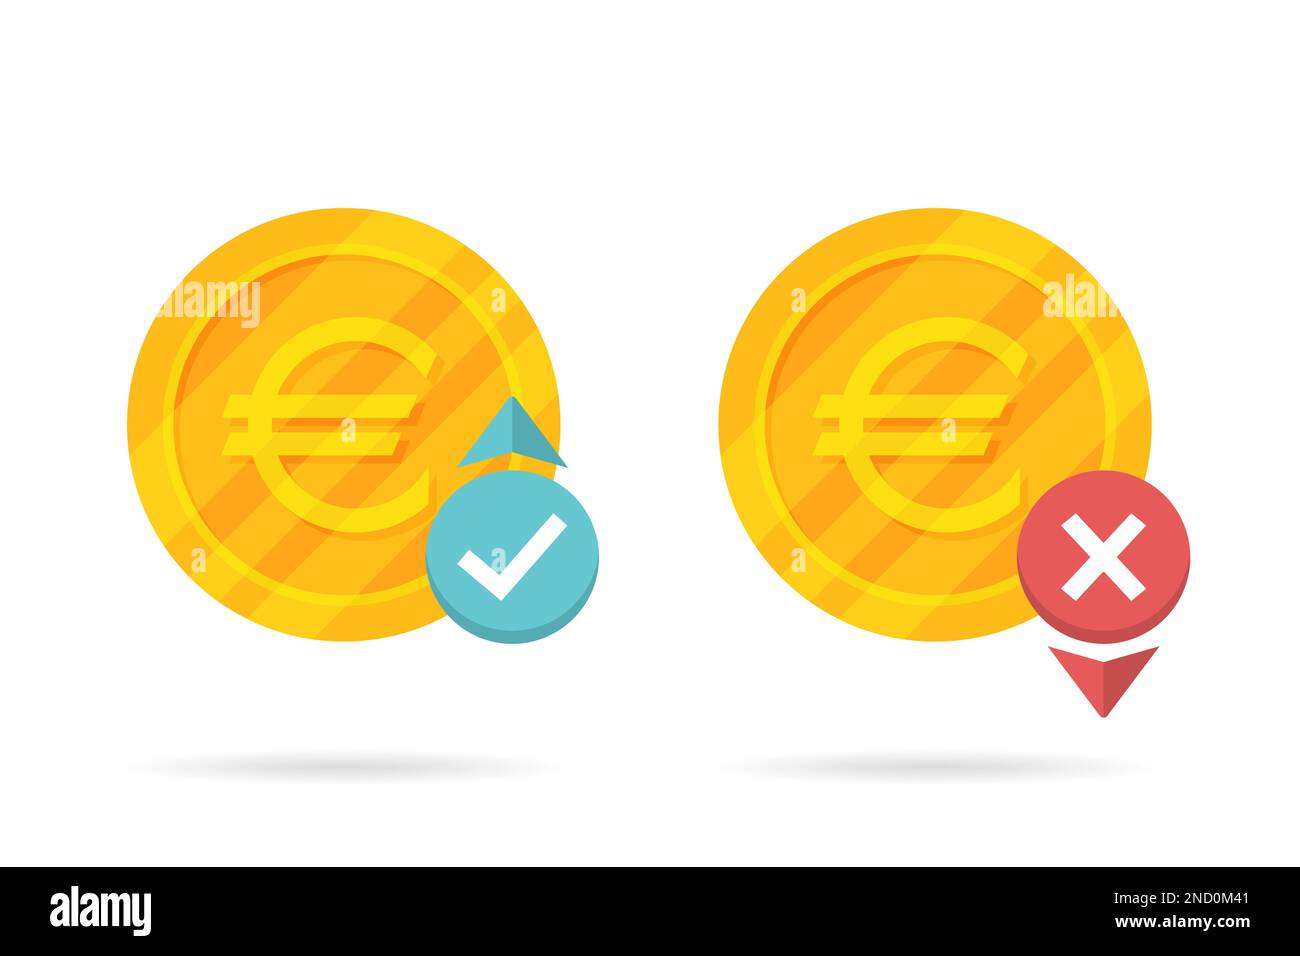 Up and down euro money icon with shadow Stock Vector